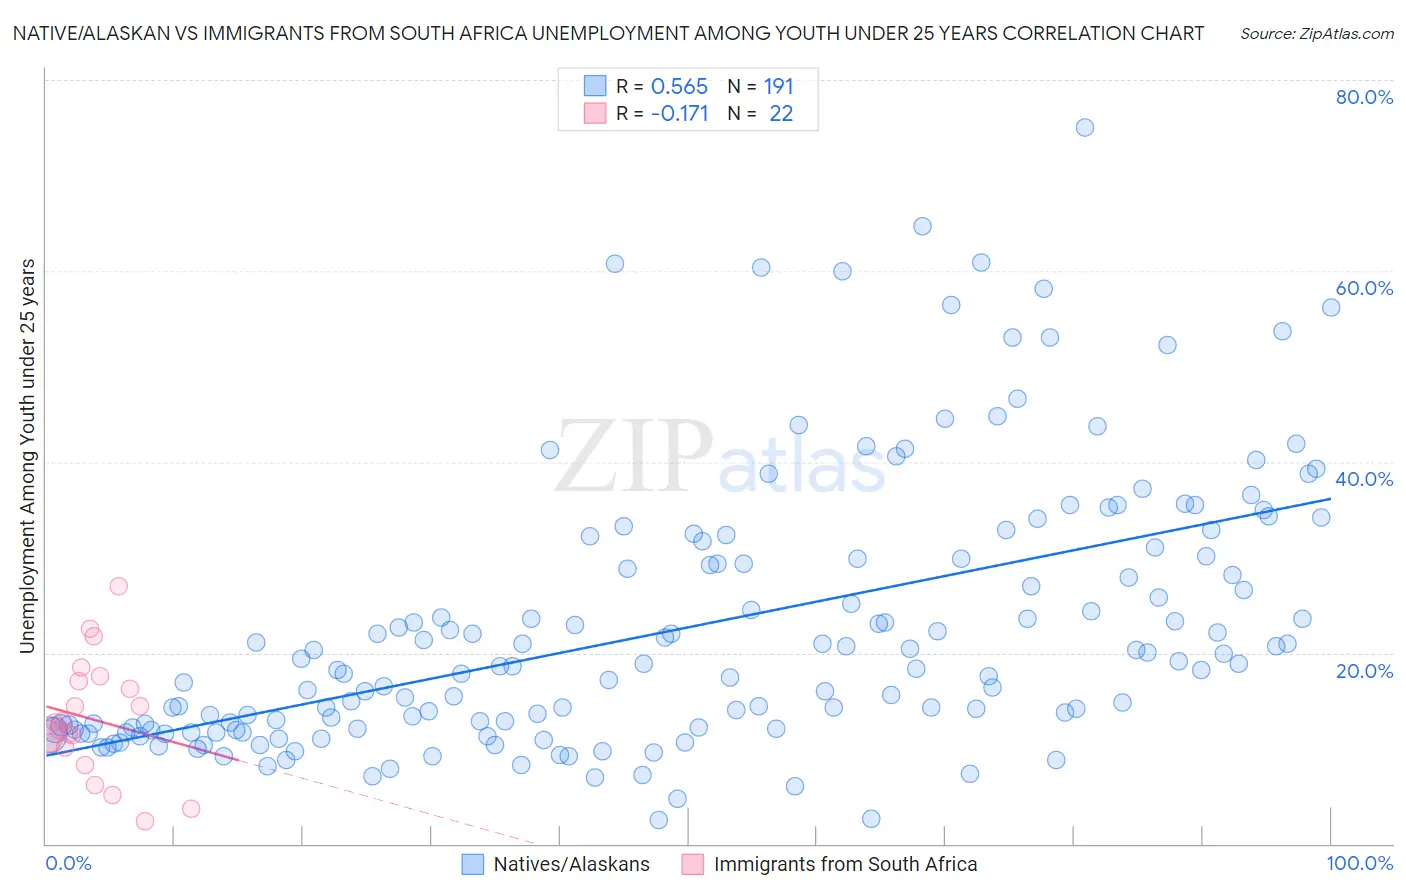 Native/Alaskan vs Immigrants from South Africa Unemployment Among Youth under 25 years